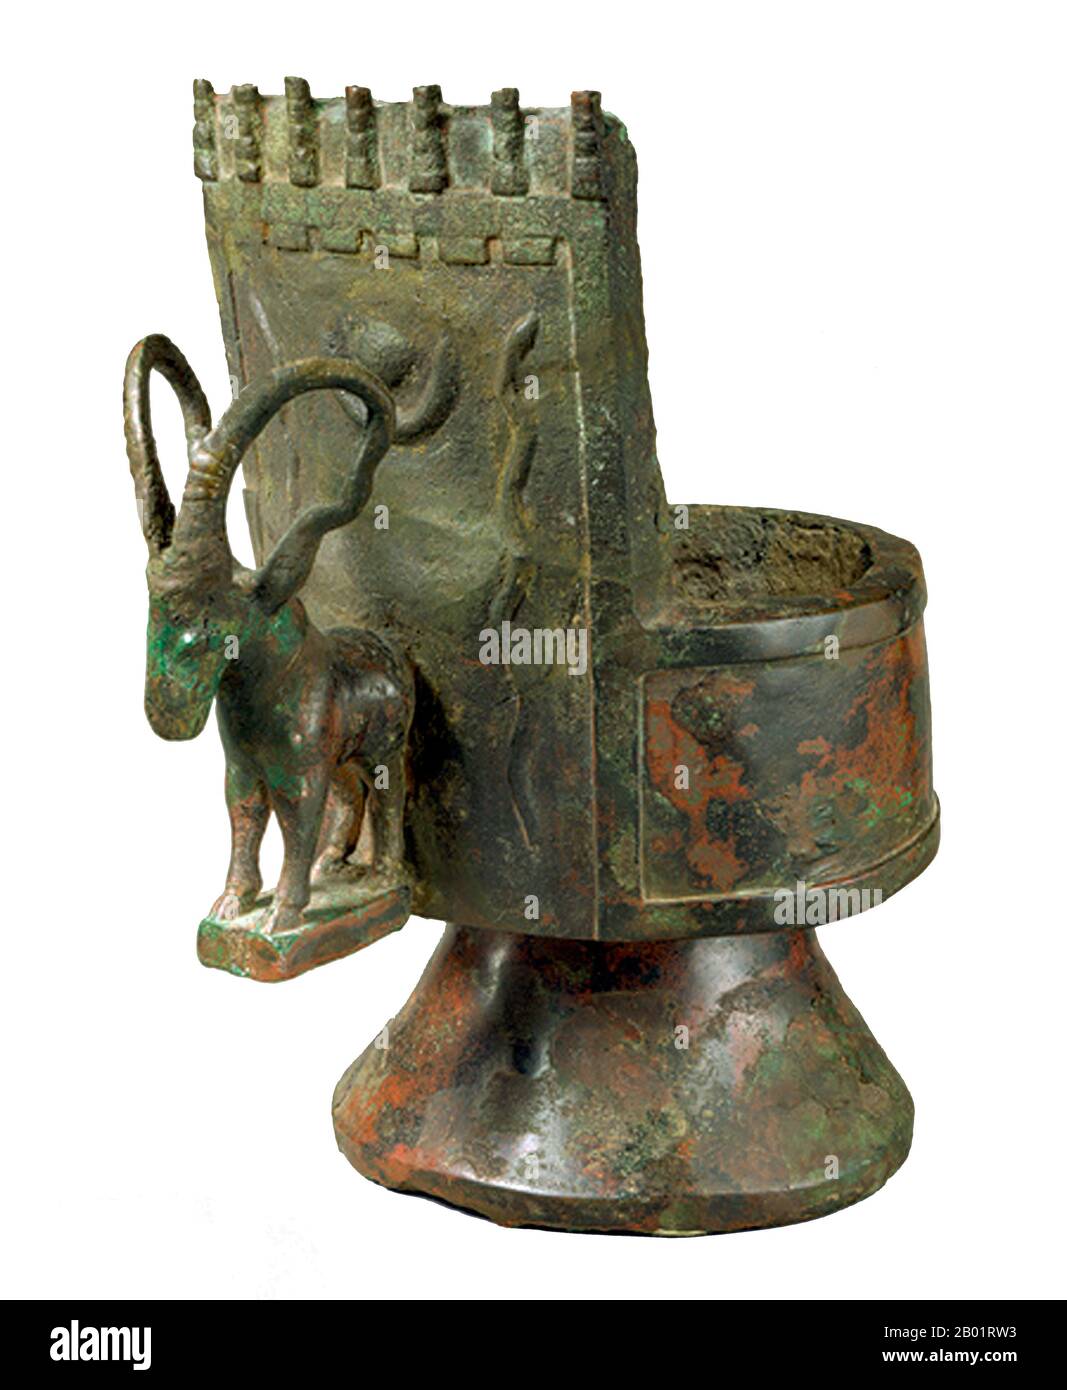 Yemen: An incense burner in bronze decorated with an ibex handle, c. 500 BCE.  Hailing from southwestern Arabia, this bronze incense burner consisted of a cylindrical cup on a conical base. The ibex and snakes on the back of the facade are symbols representing fertility and virility and are often associated with local gods.  Incense - myrrh and frankincense - travelled north along the ancient Incense Roads from Yemen and Oman from early antiquity. Used in worship and to perfume the air, various types of incense burner were used in this process. Stock Photo